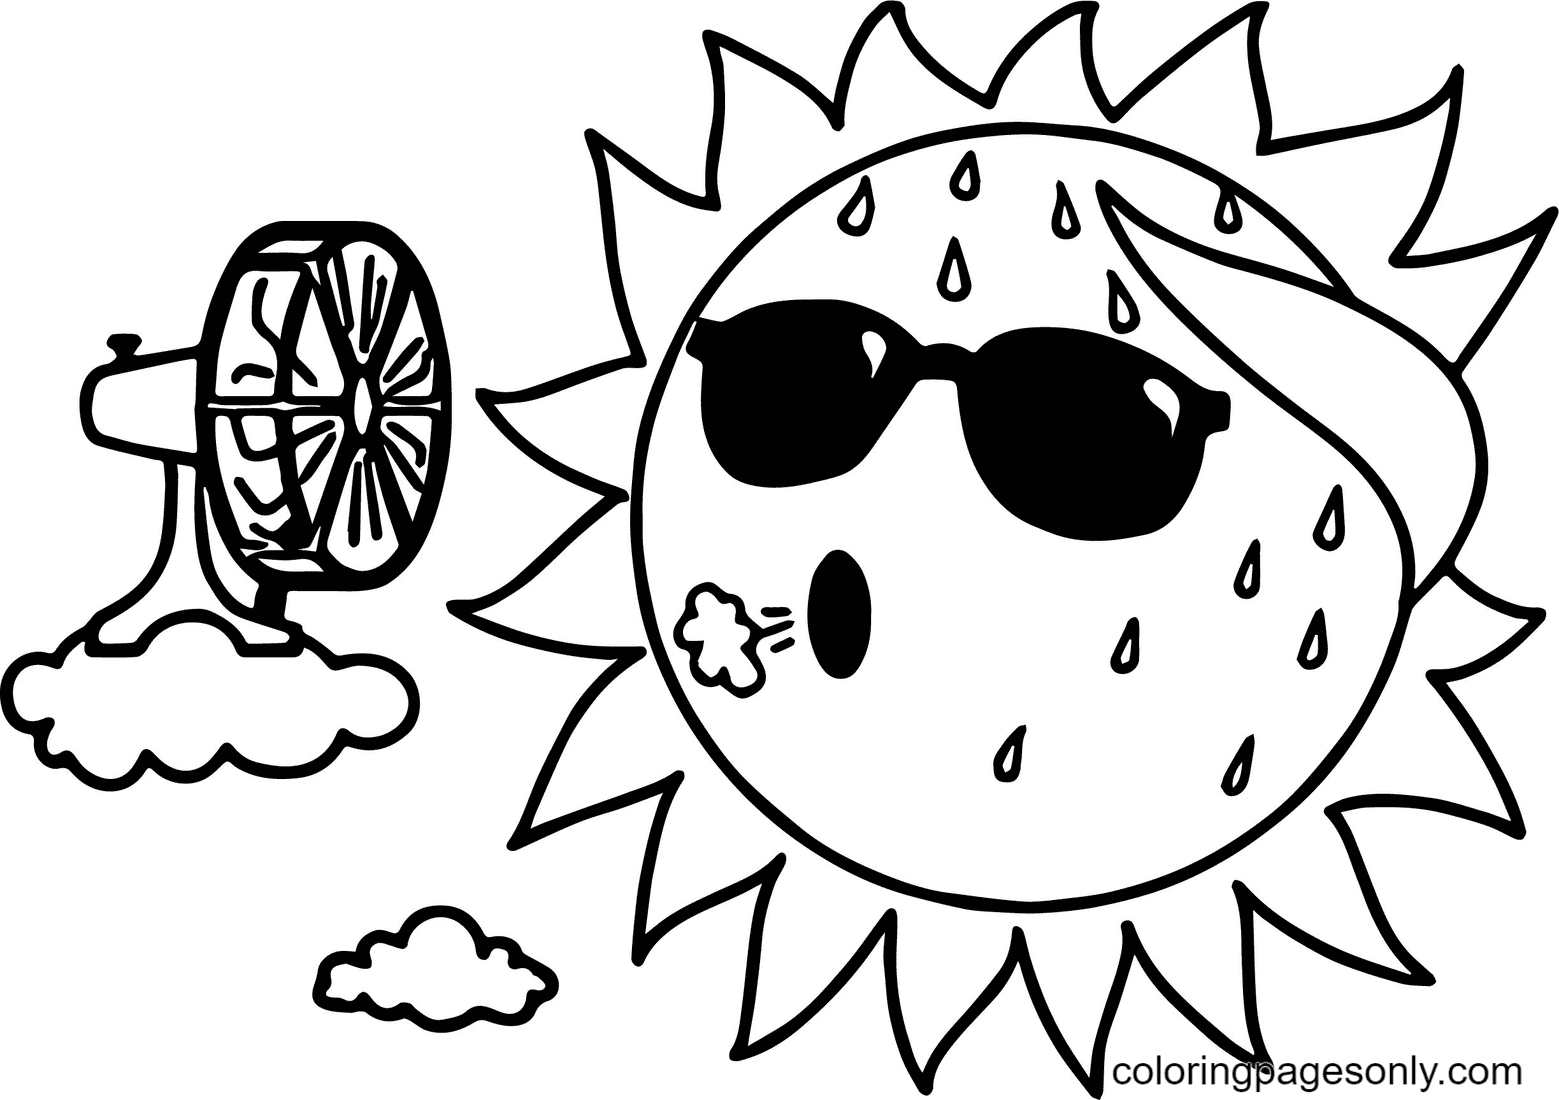 The Sun and the Fan Coloring Page